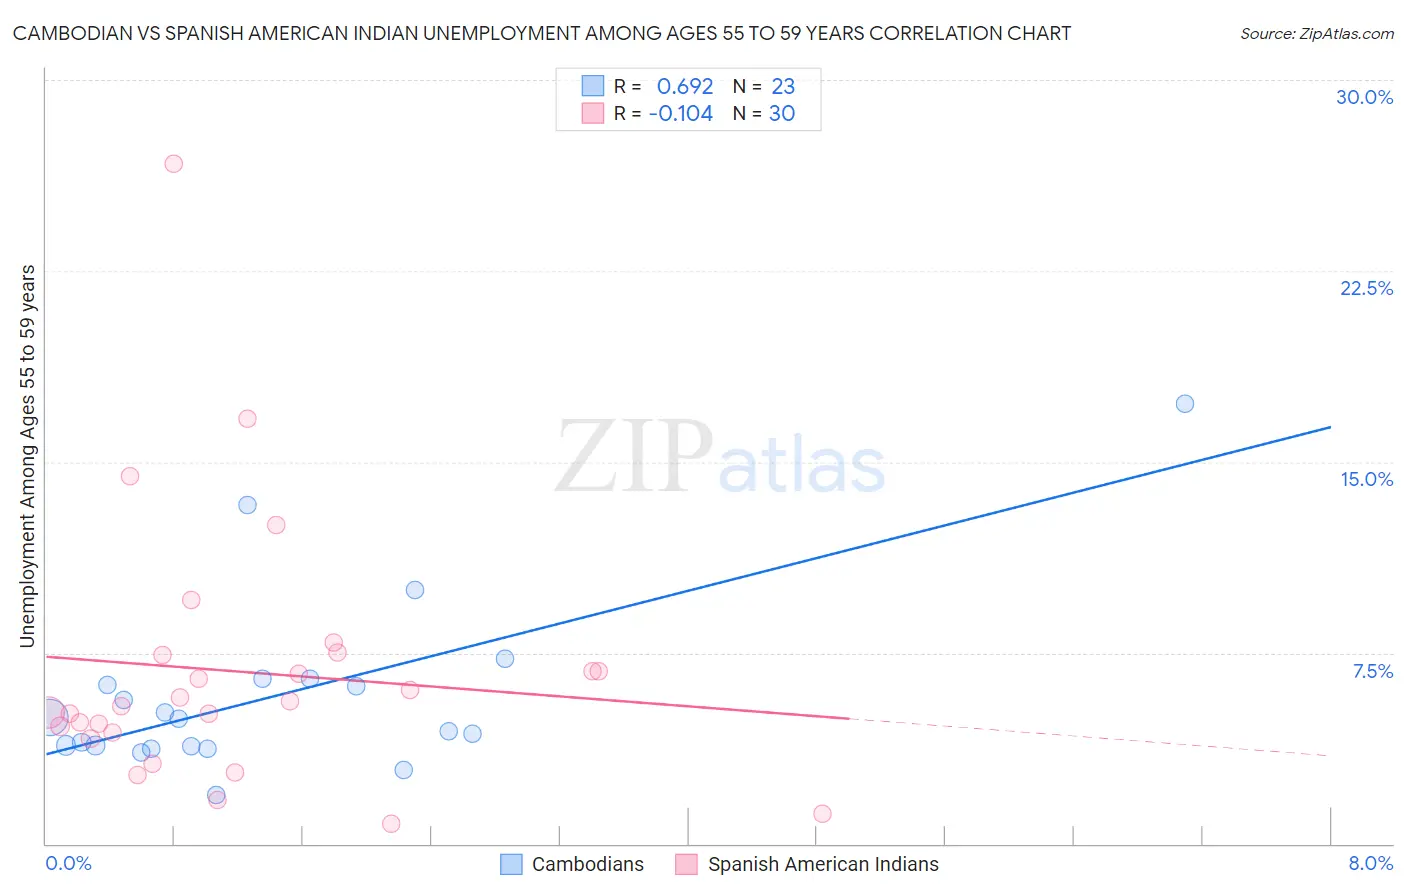 Cambodian vs Spanish American Indian Unemployment Among Ages 55 to 59 years